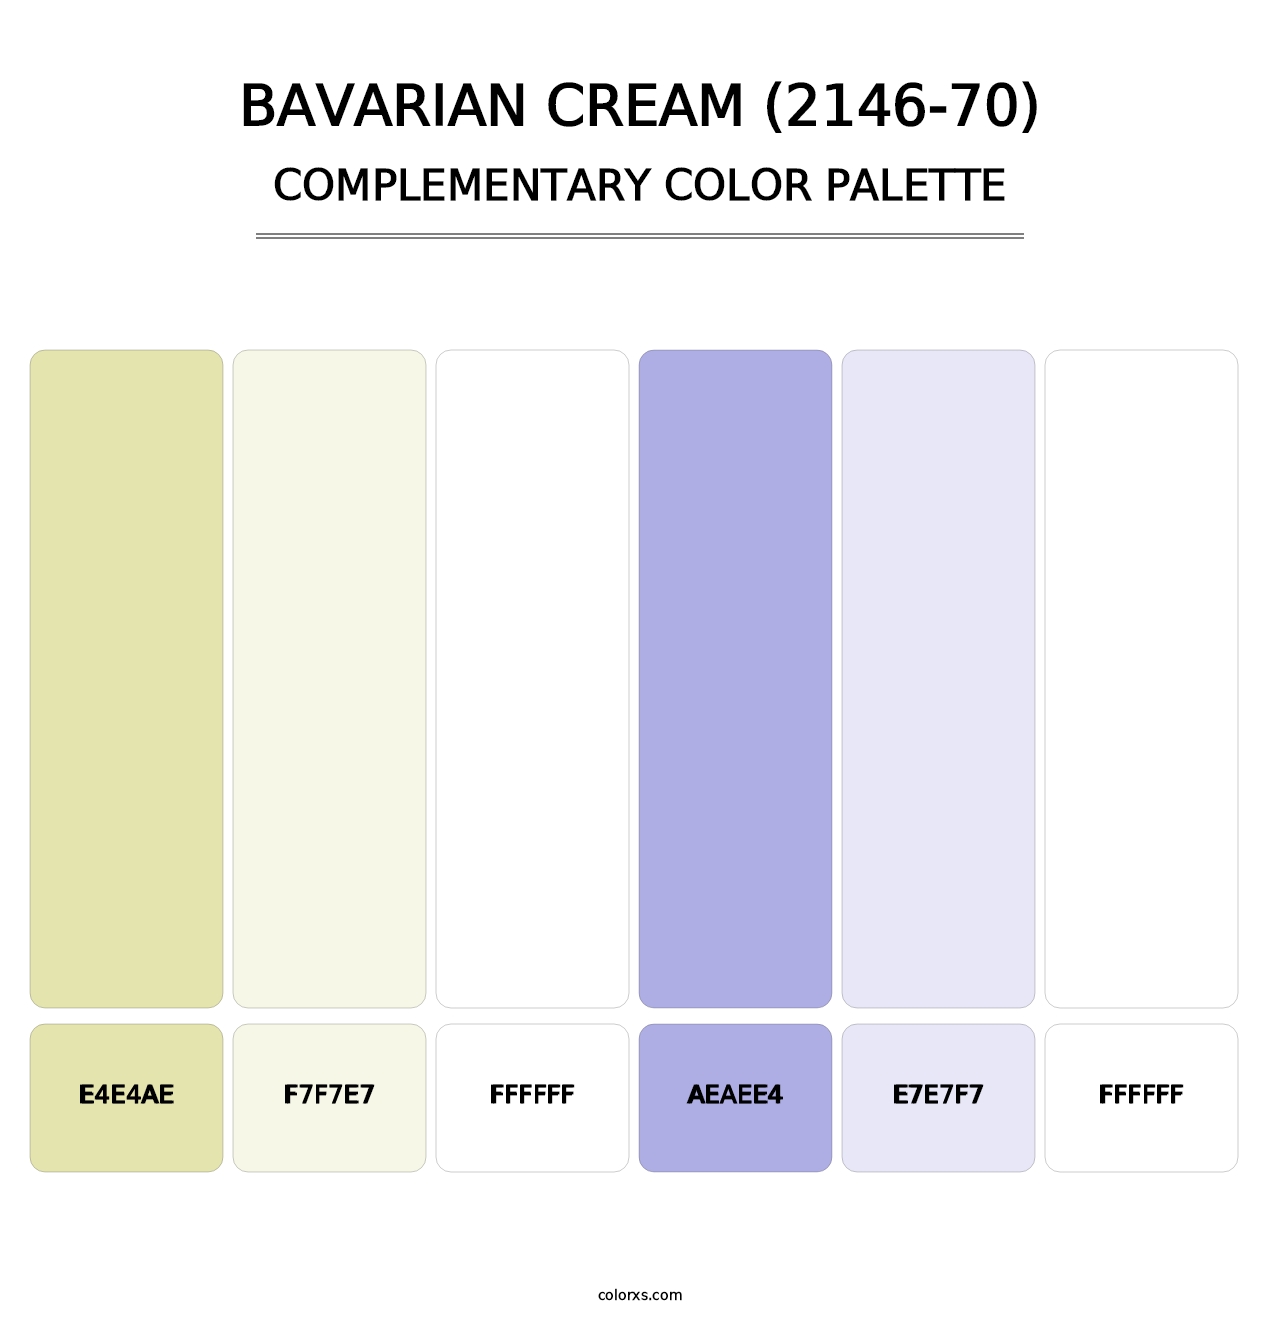 Bavarian Cream (2146-70) - Complementary Color Palette